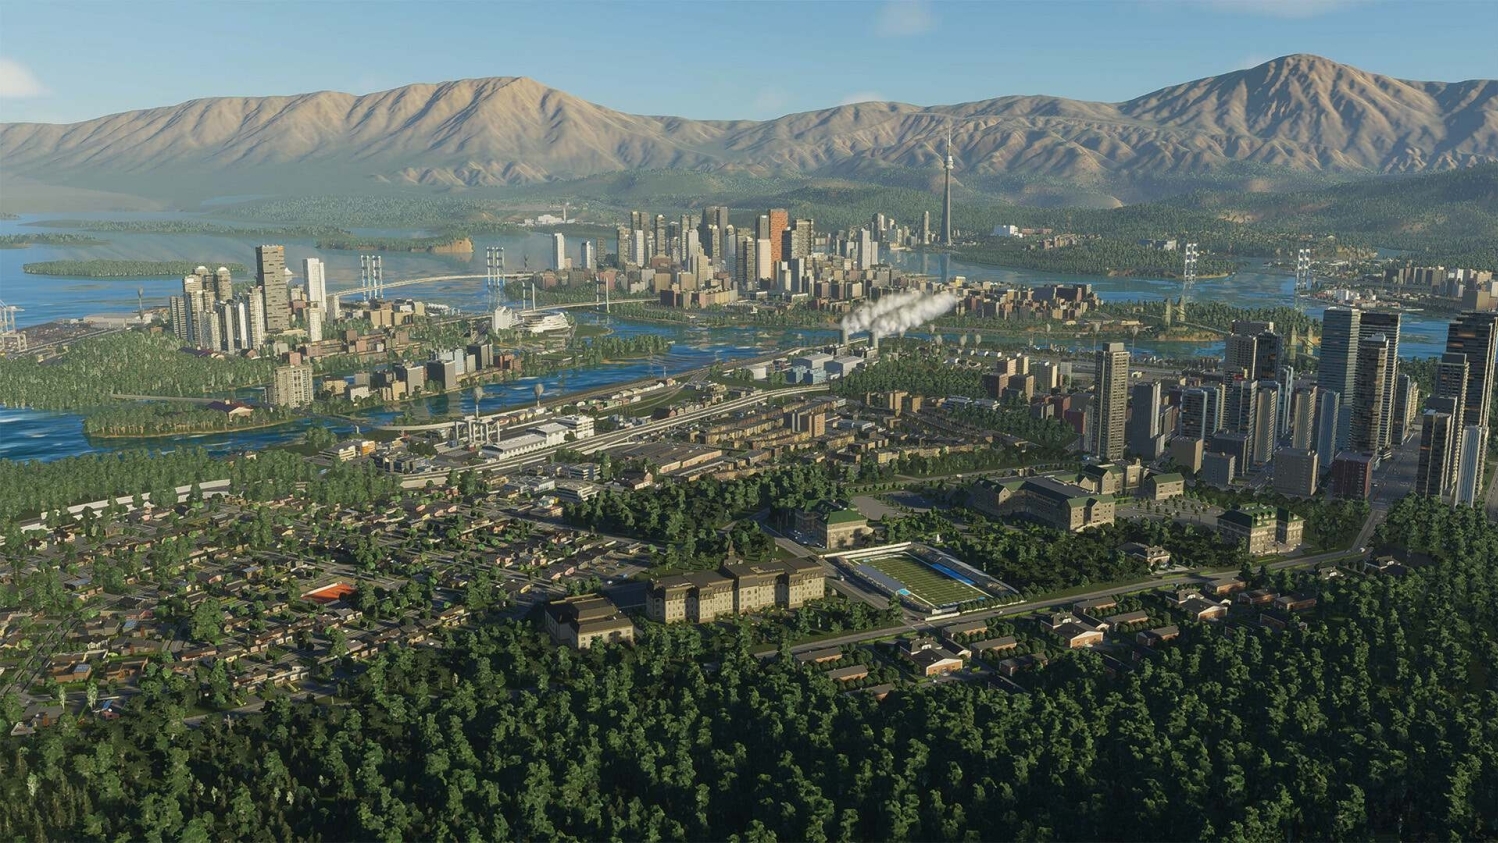 Cities skylines ps4 bugs  Paradox Interactive Forums